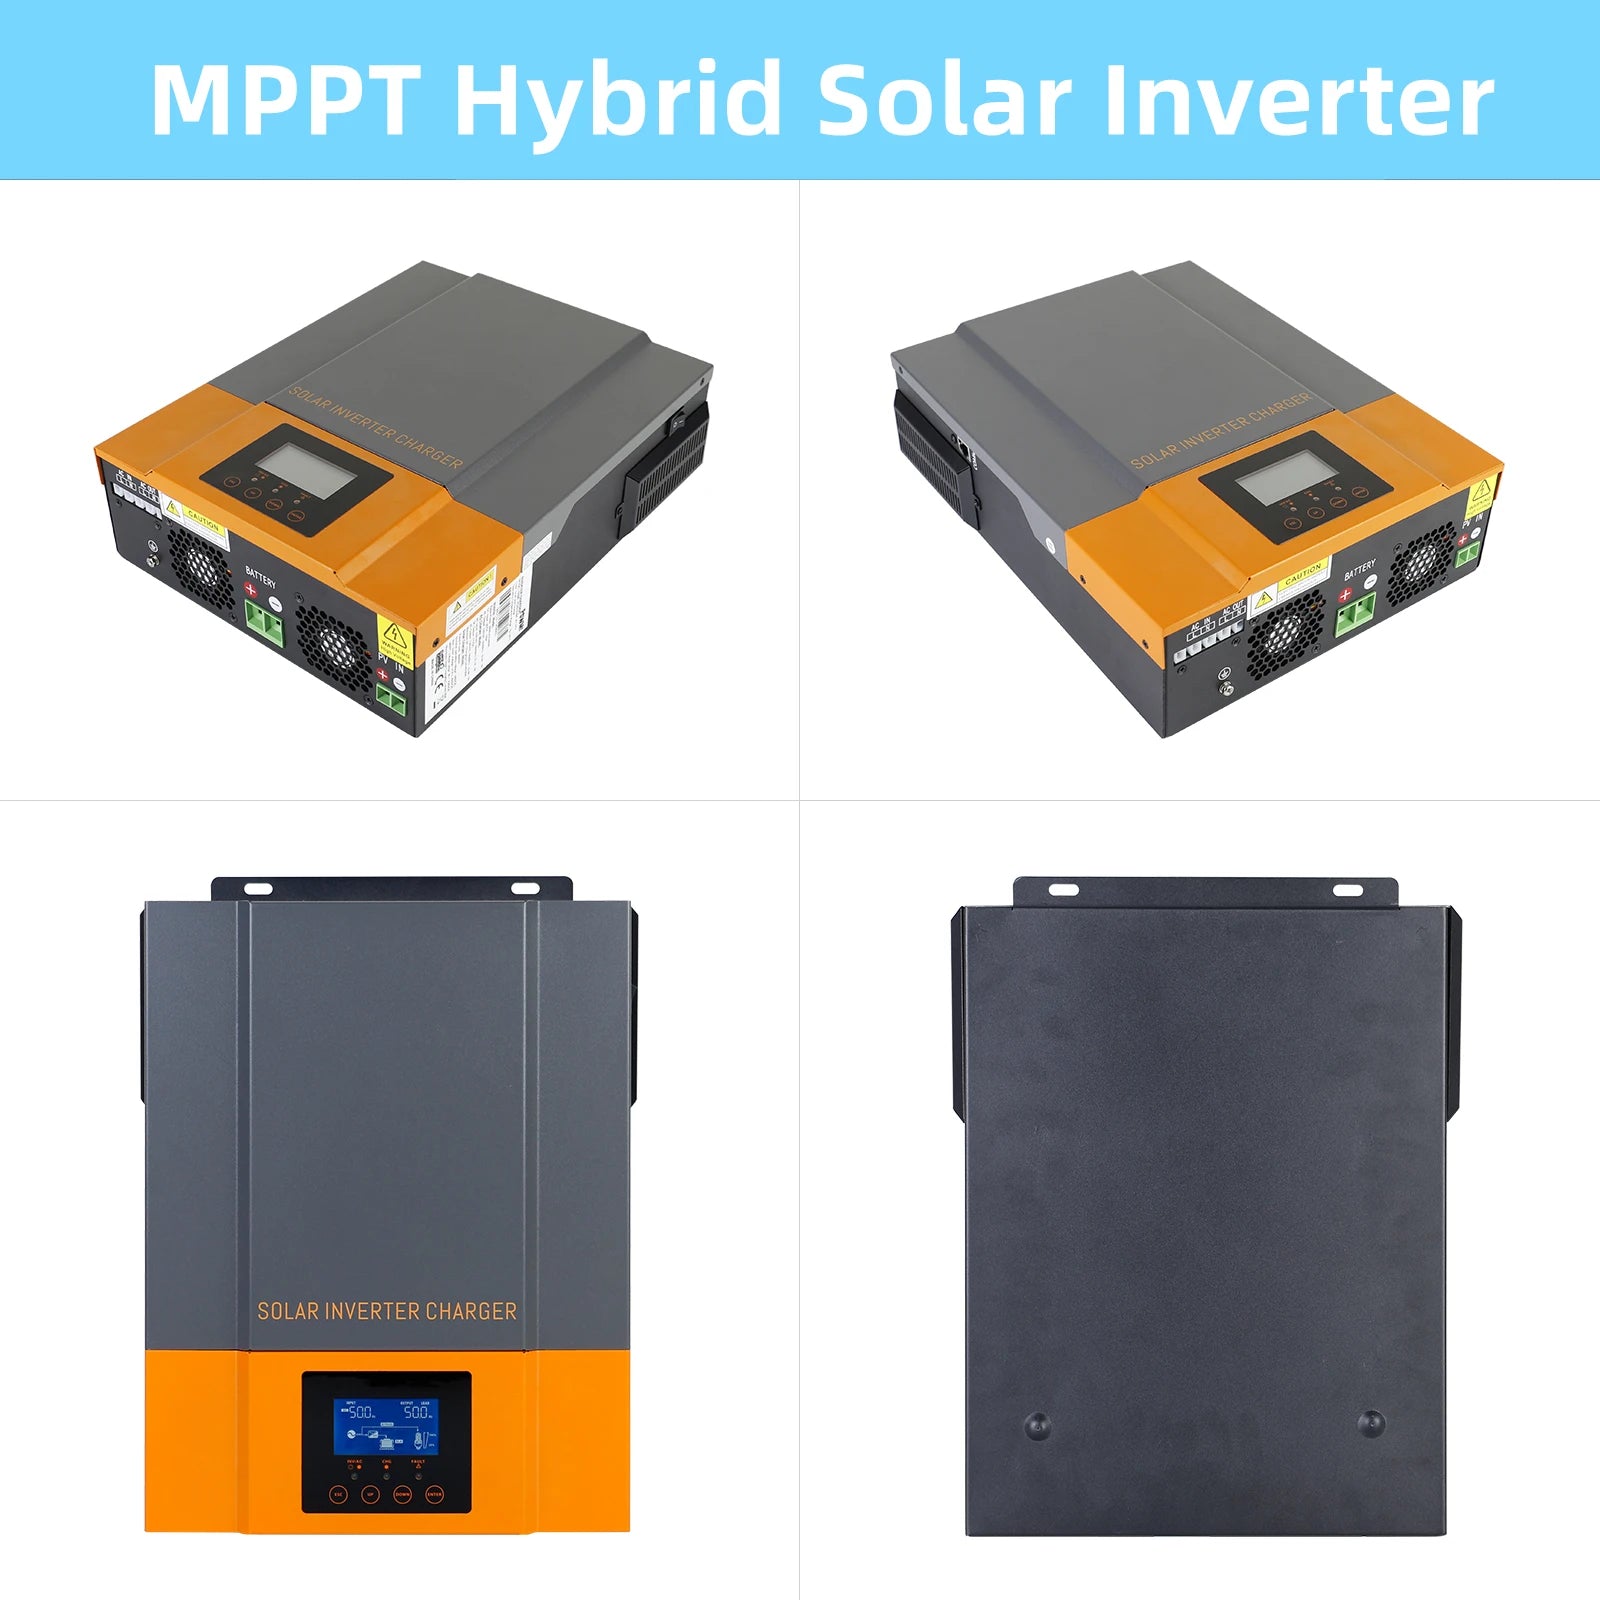 PowMr Hybrid Solar Inverter with MPPT tech for multiple battery types and 3 output power options.